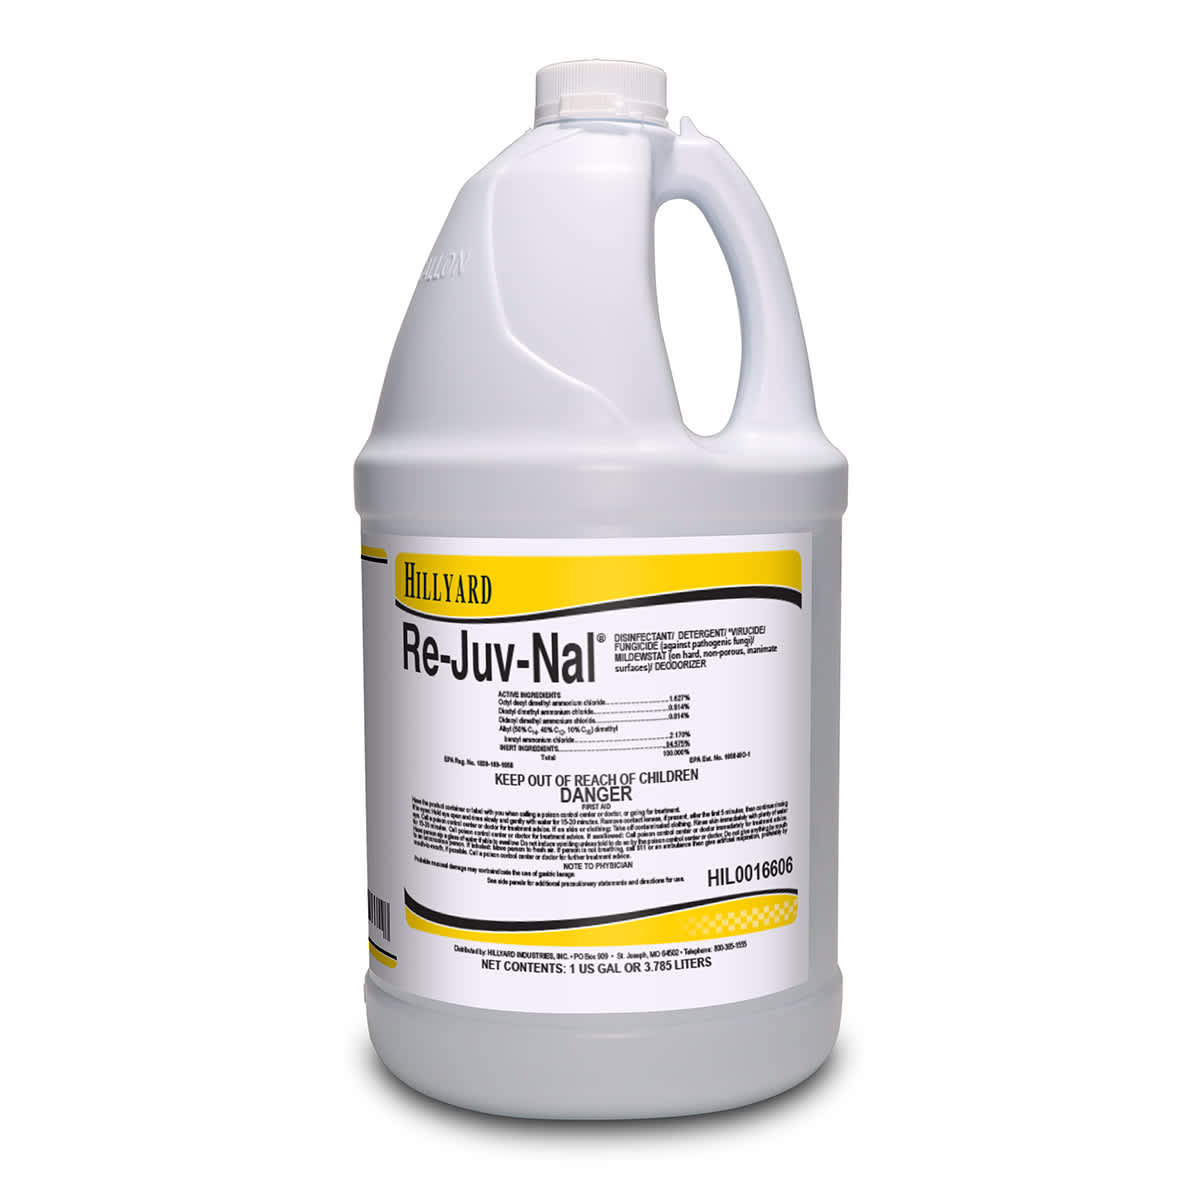 Hillyard Re-Juv-Nal Disinfectant